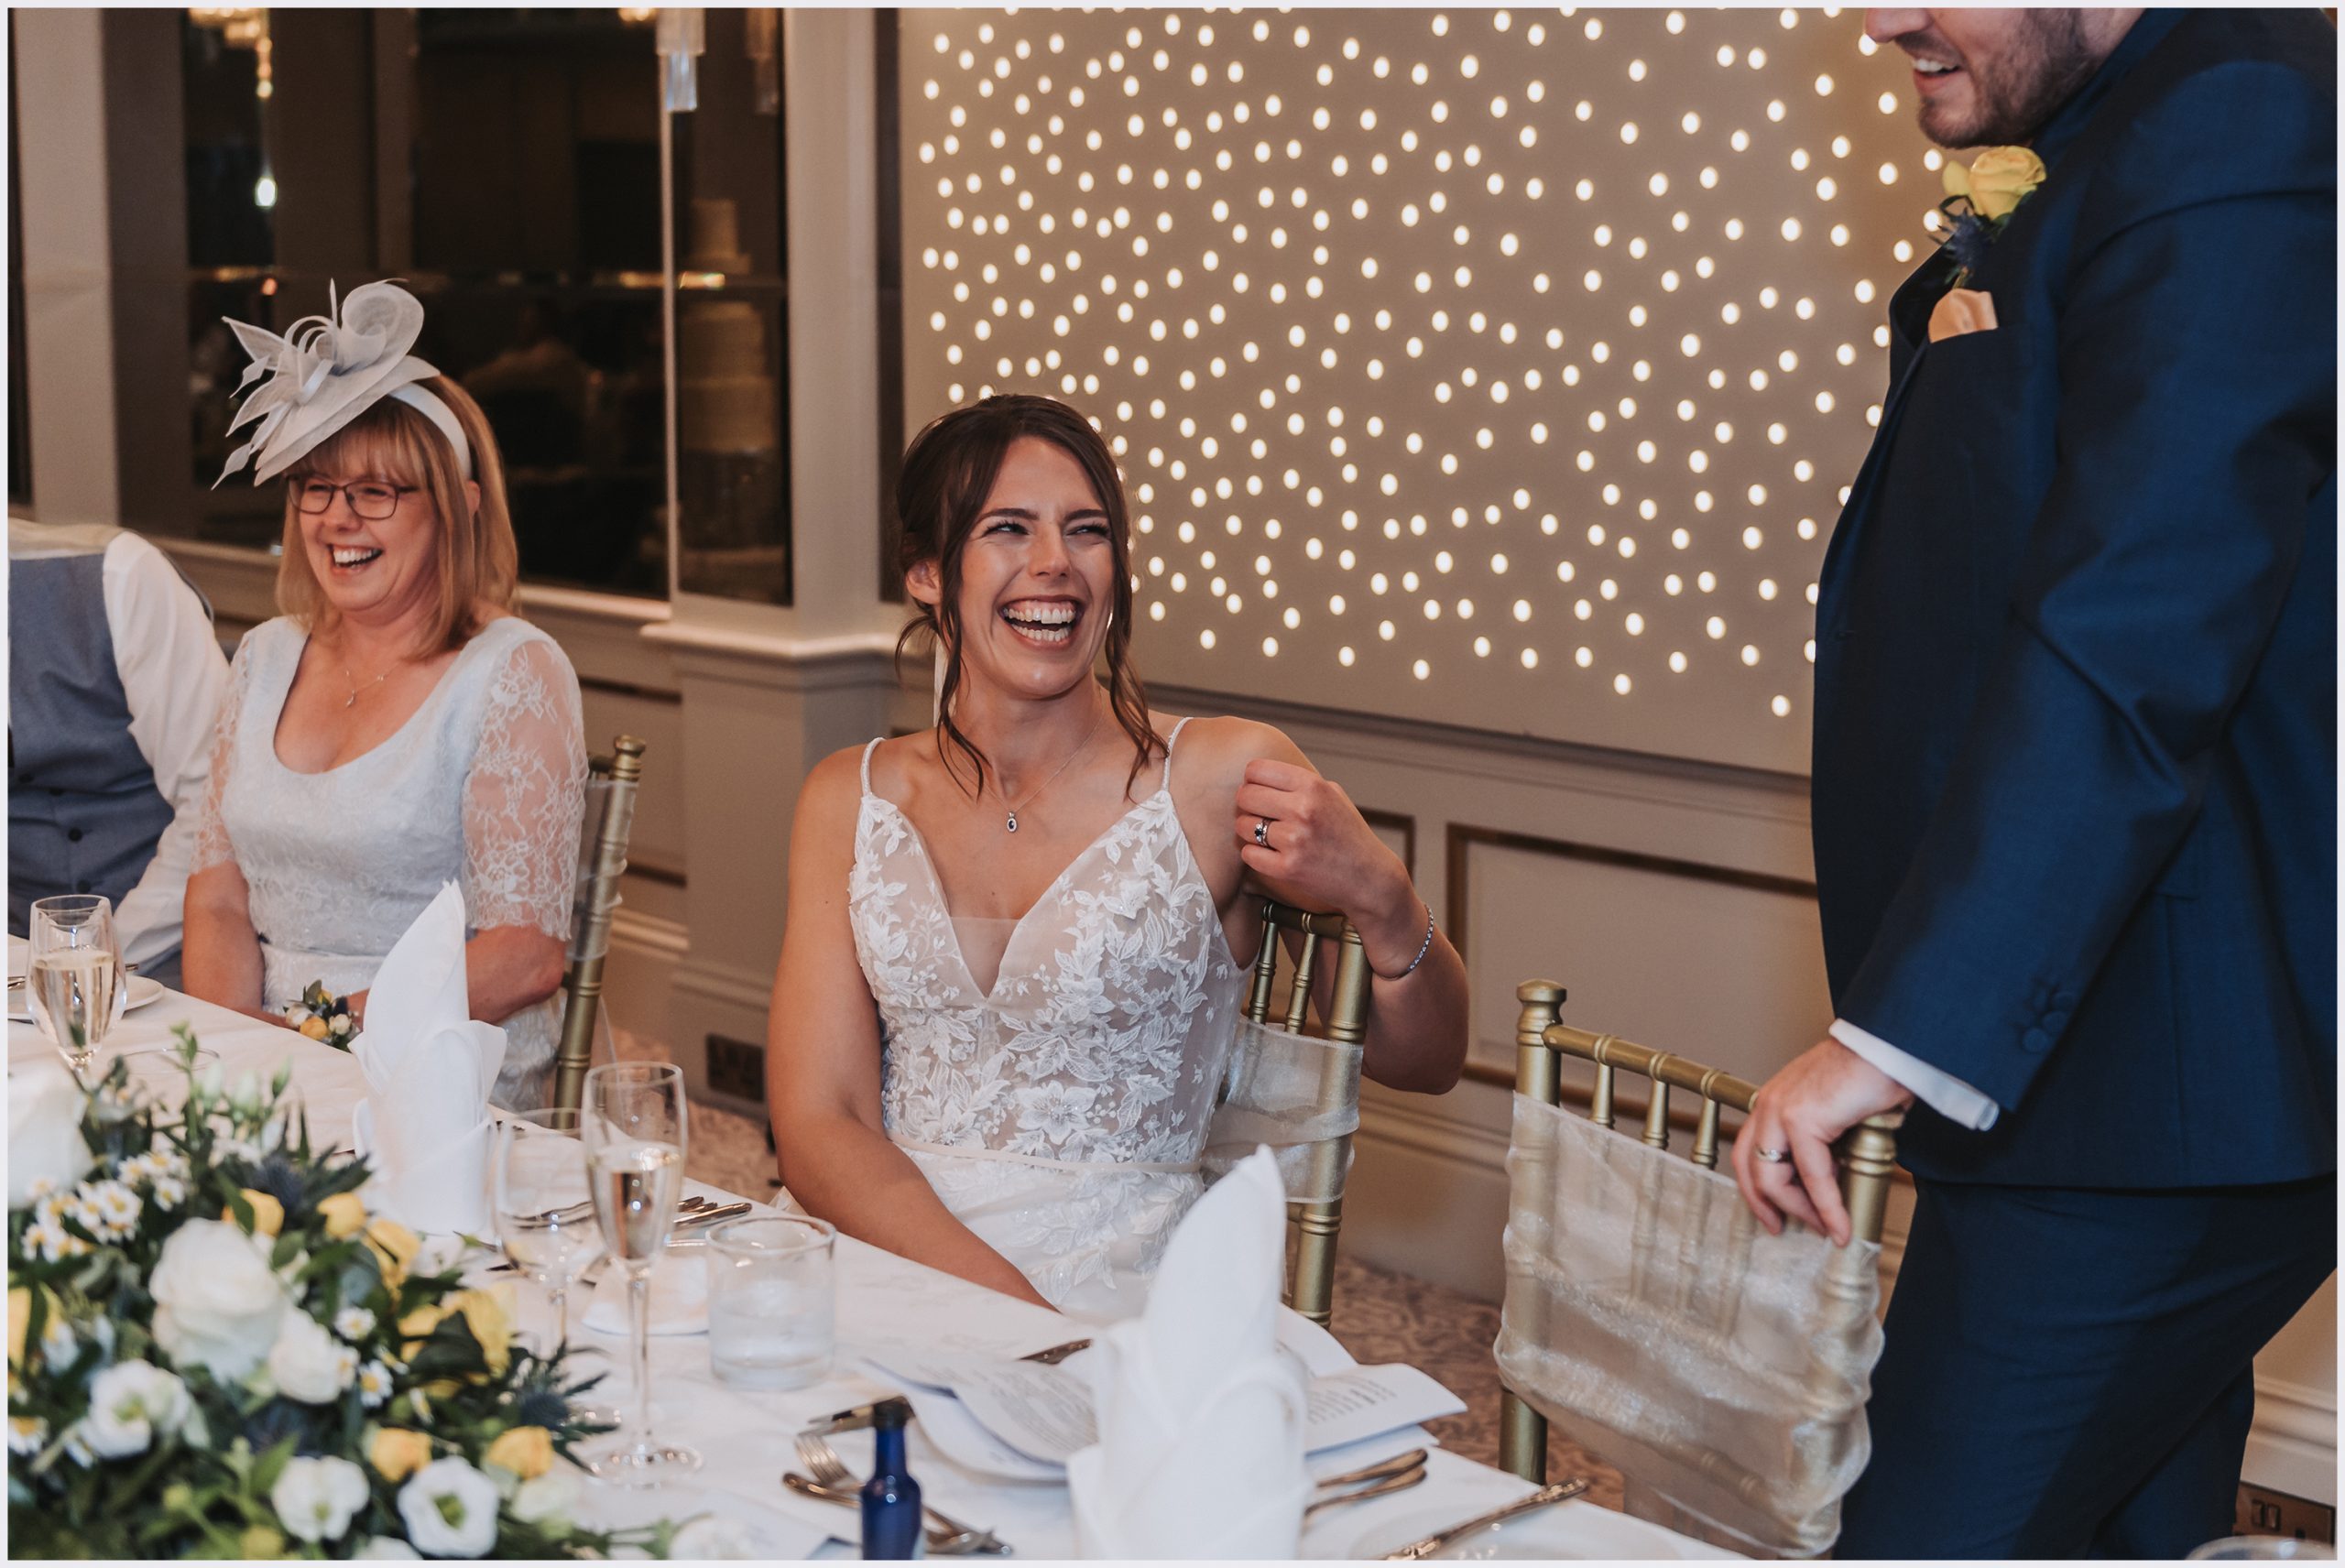 A bride looks up at her husband smiling while he makes his speech at their wedding at The Grosvenor Pulford Hotel and Spa.  Image captured by Helena Jayne Photography a north Wales based wedding photographer